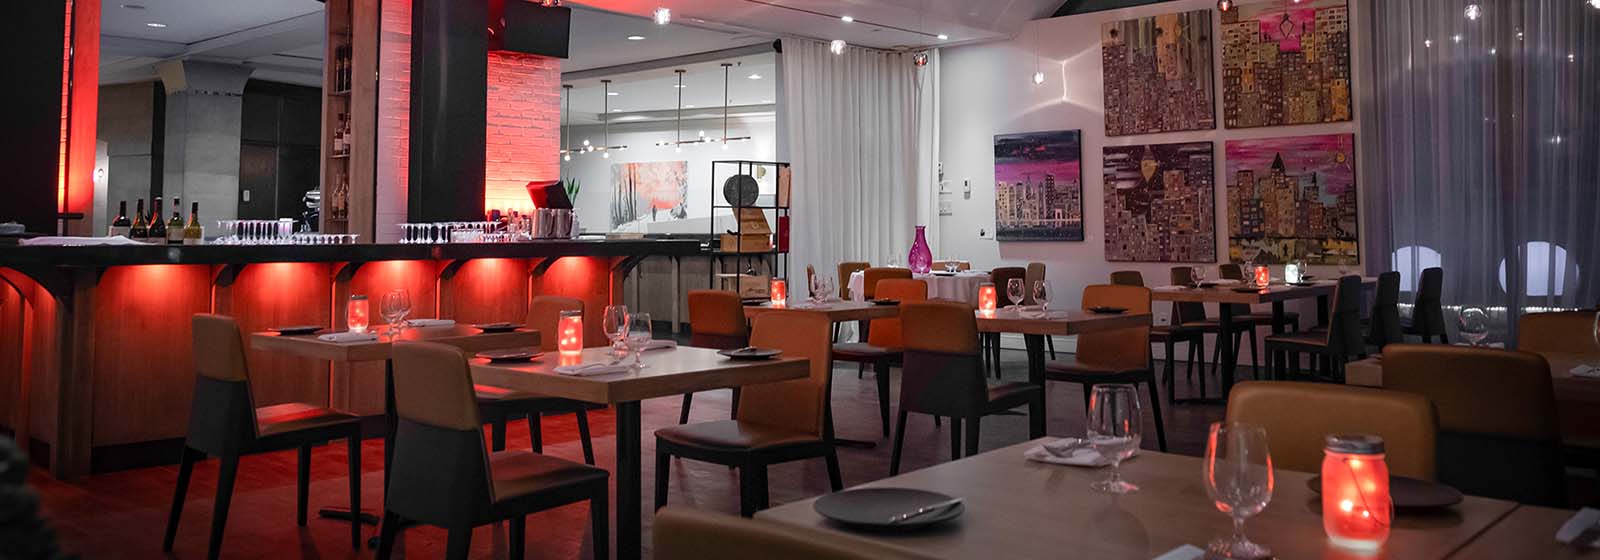 Oskar restaurant Experience located in the heart of Le Saint-Sulpice Hotel Montreal